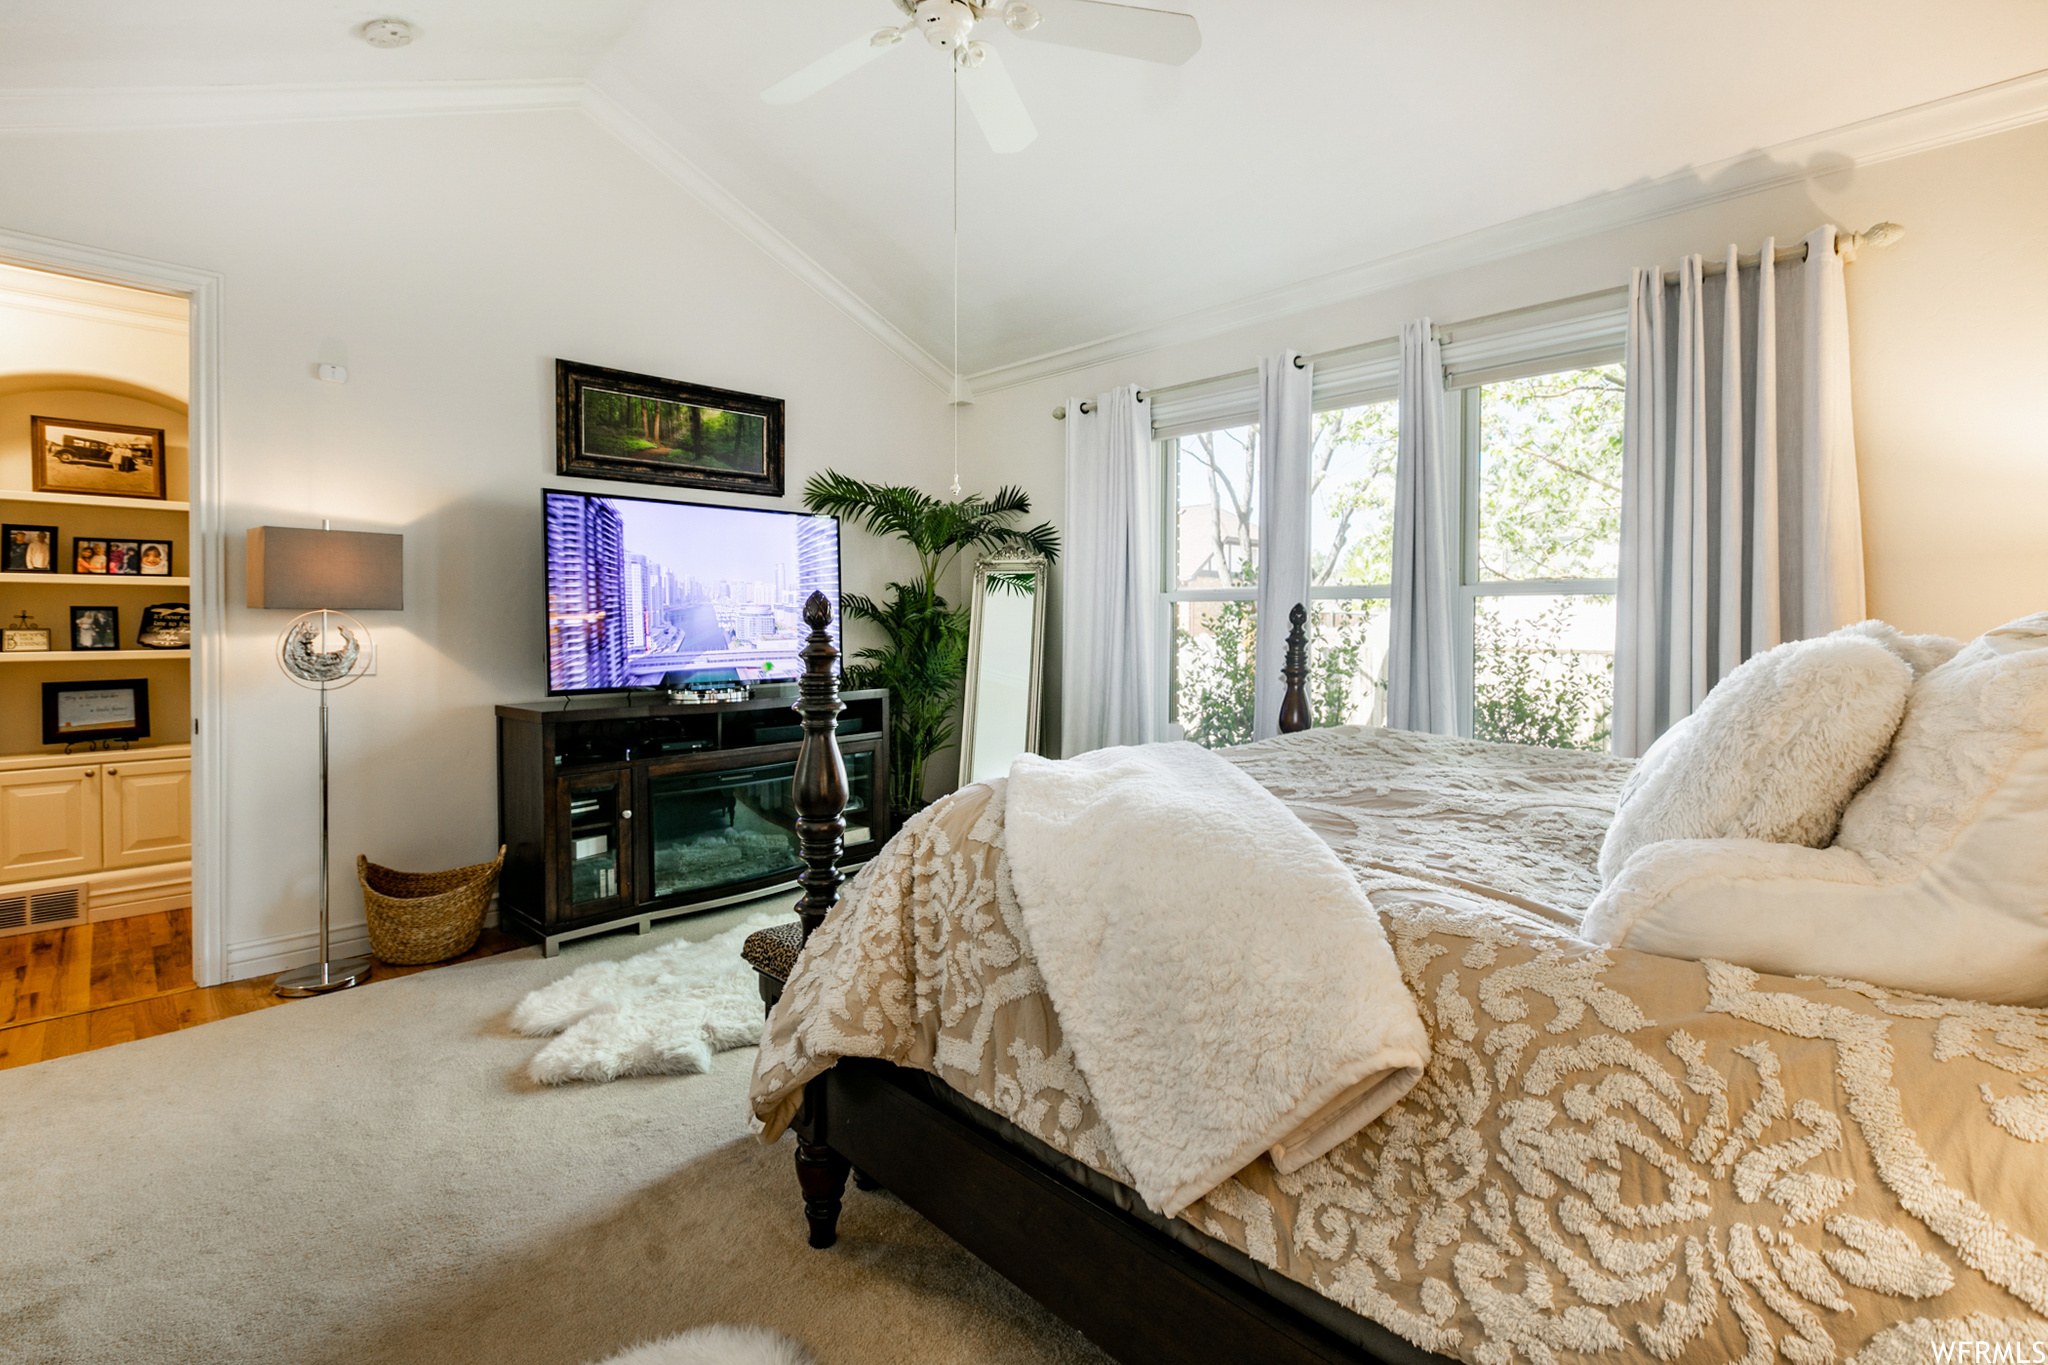 Hardwood flooring, crown molding, ceiling fan and a wall of windows complete the bedroom.